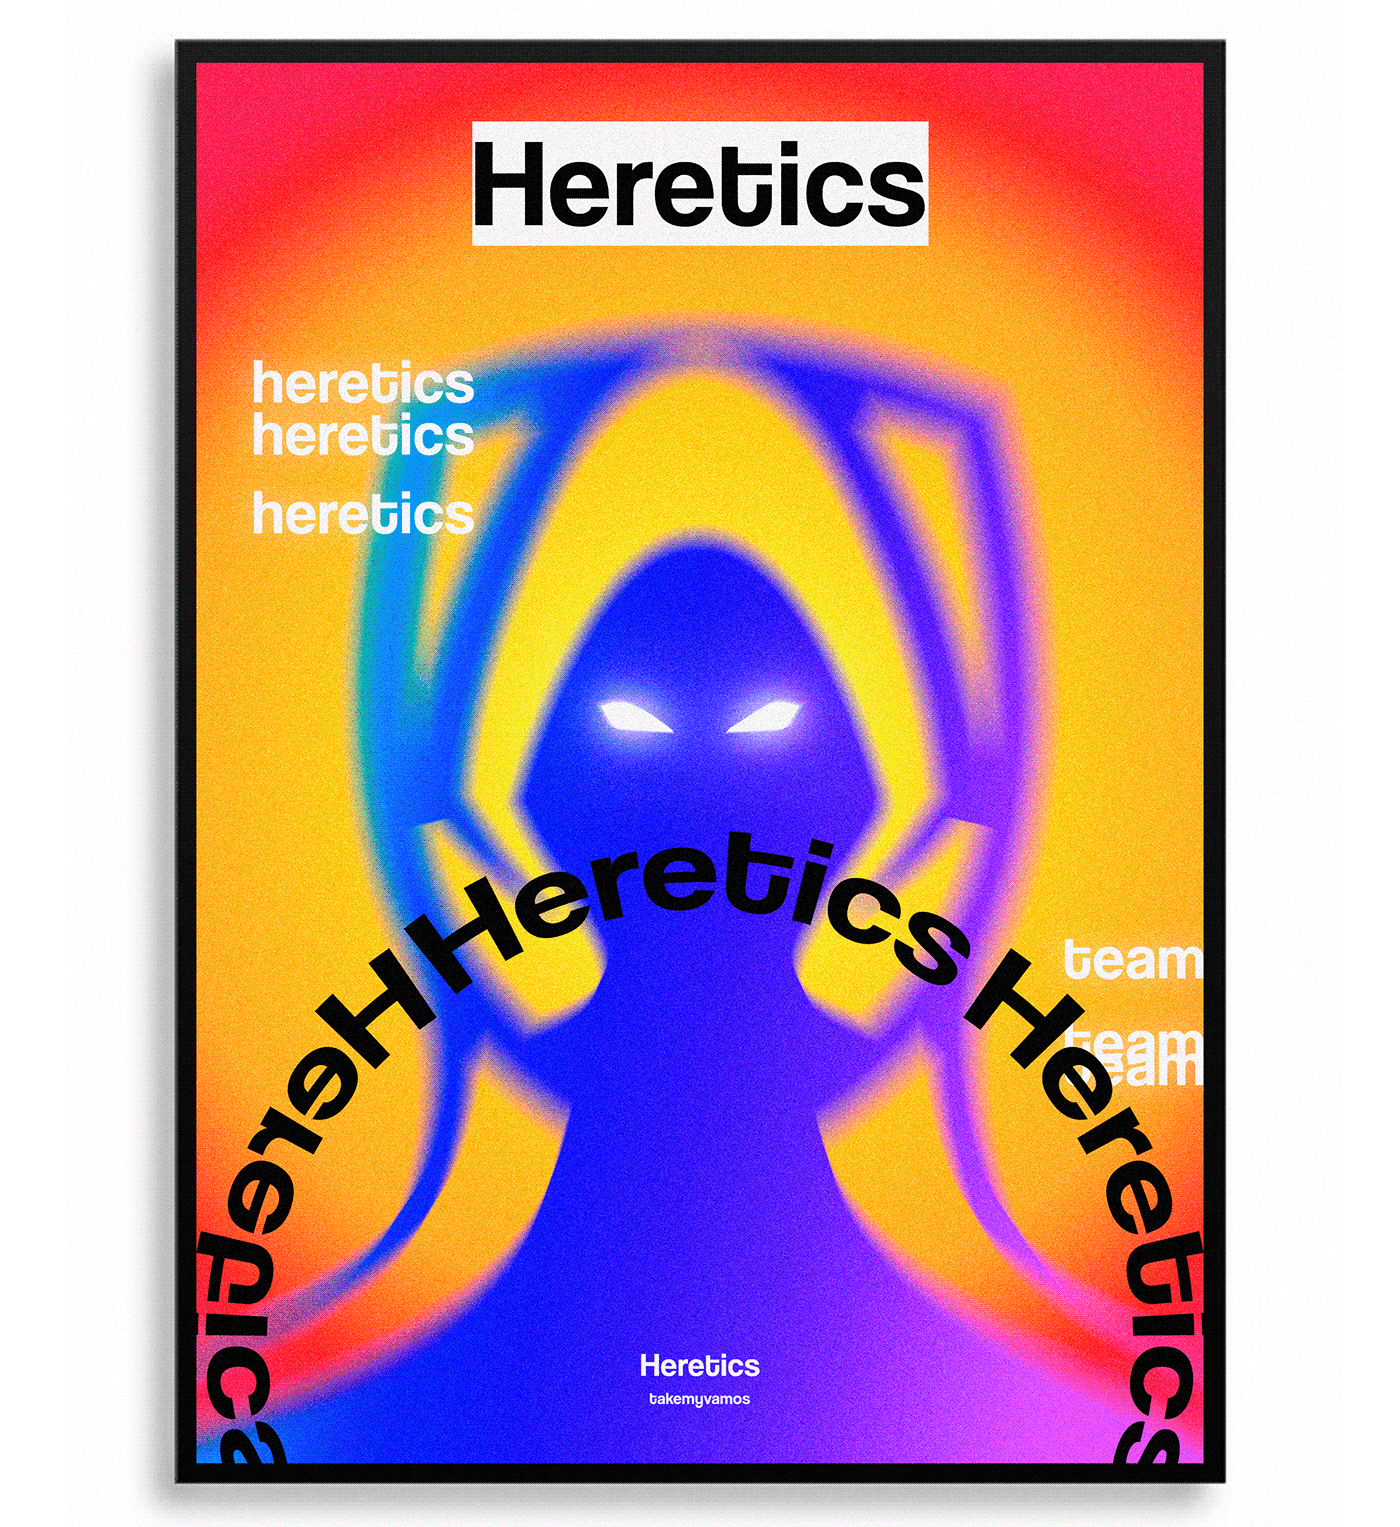 poster heretics Advertising  esports Gaming graphics Social media post stream text youtube